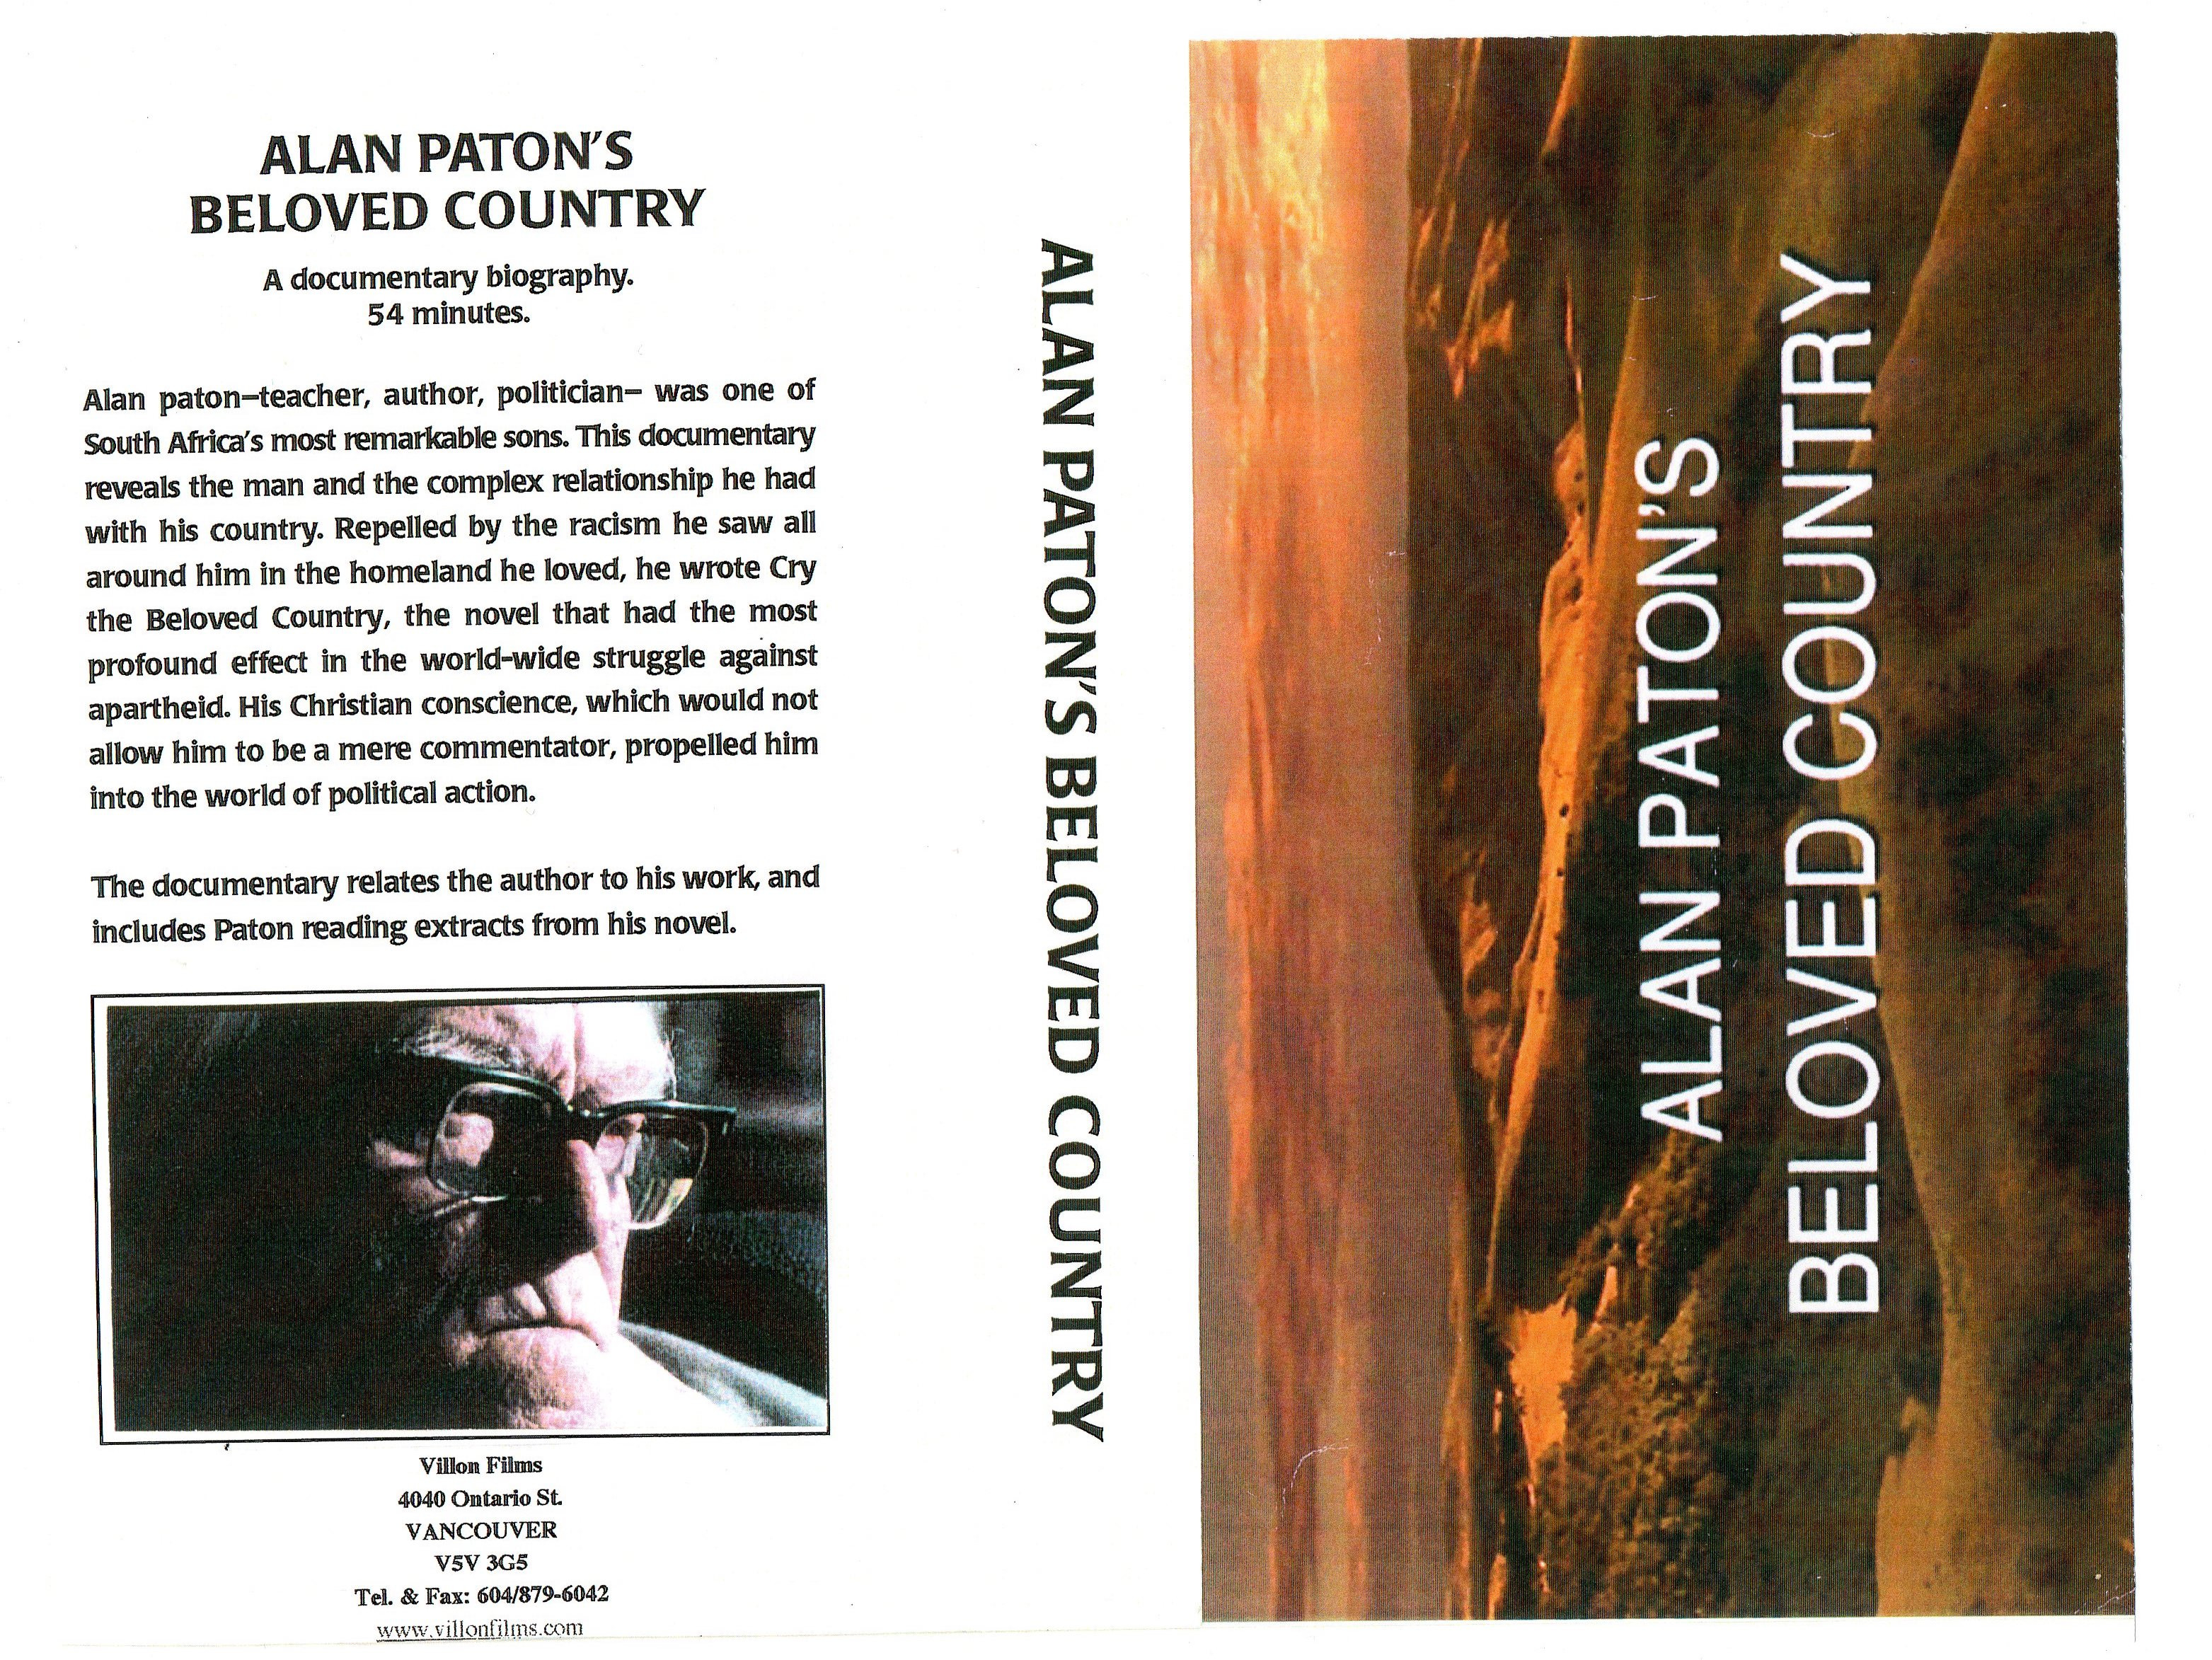 Alan Paton's Beloved Country - VHS Sleeve.